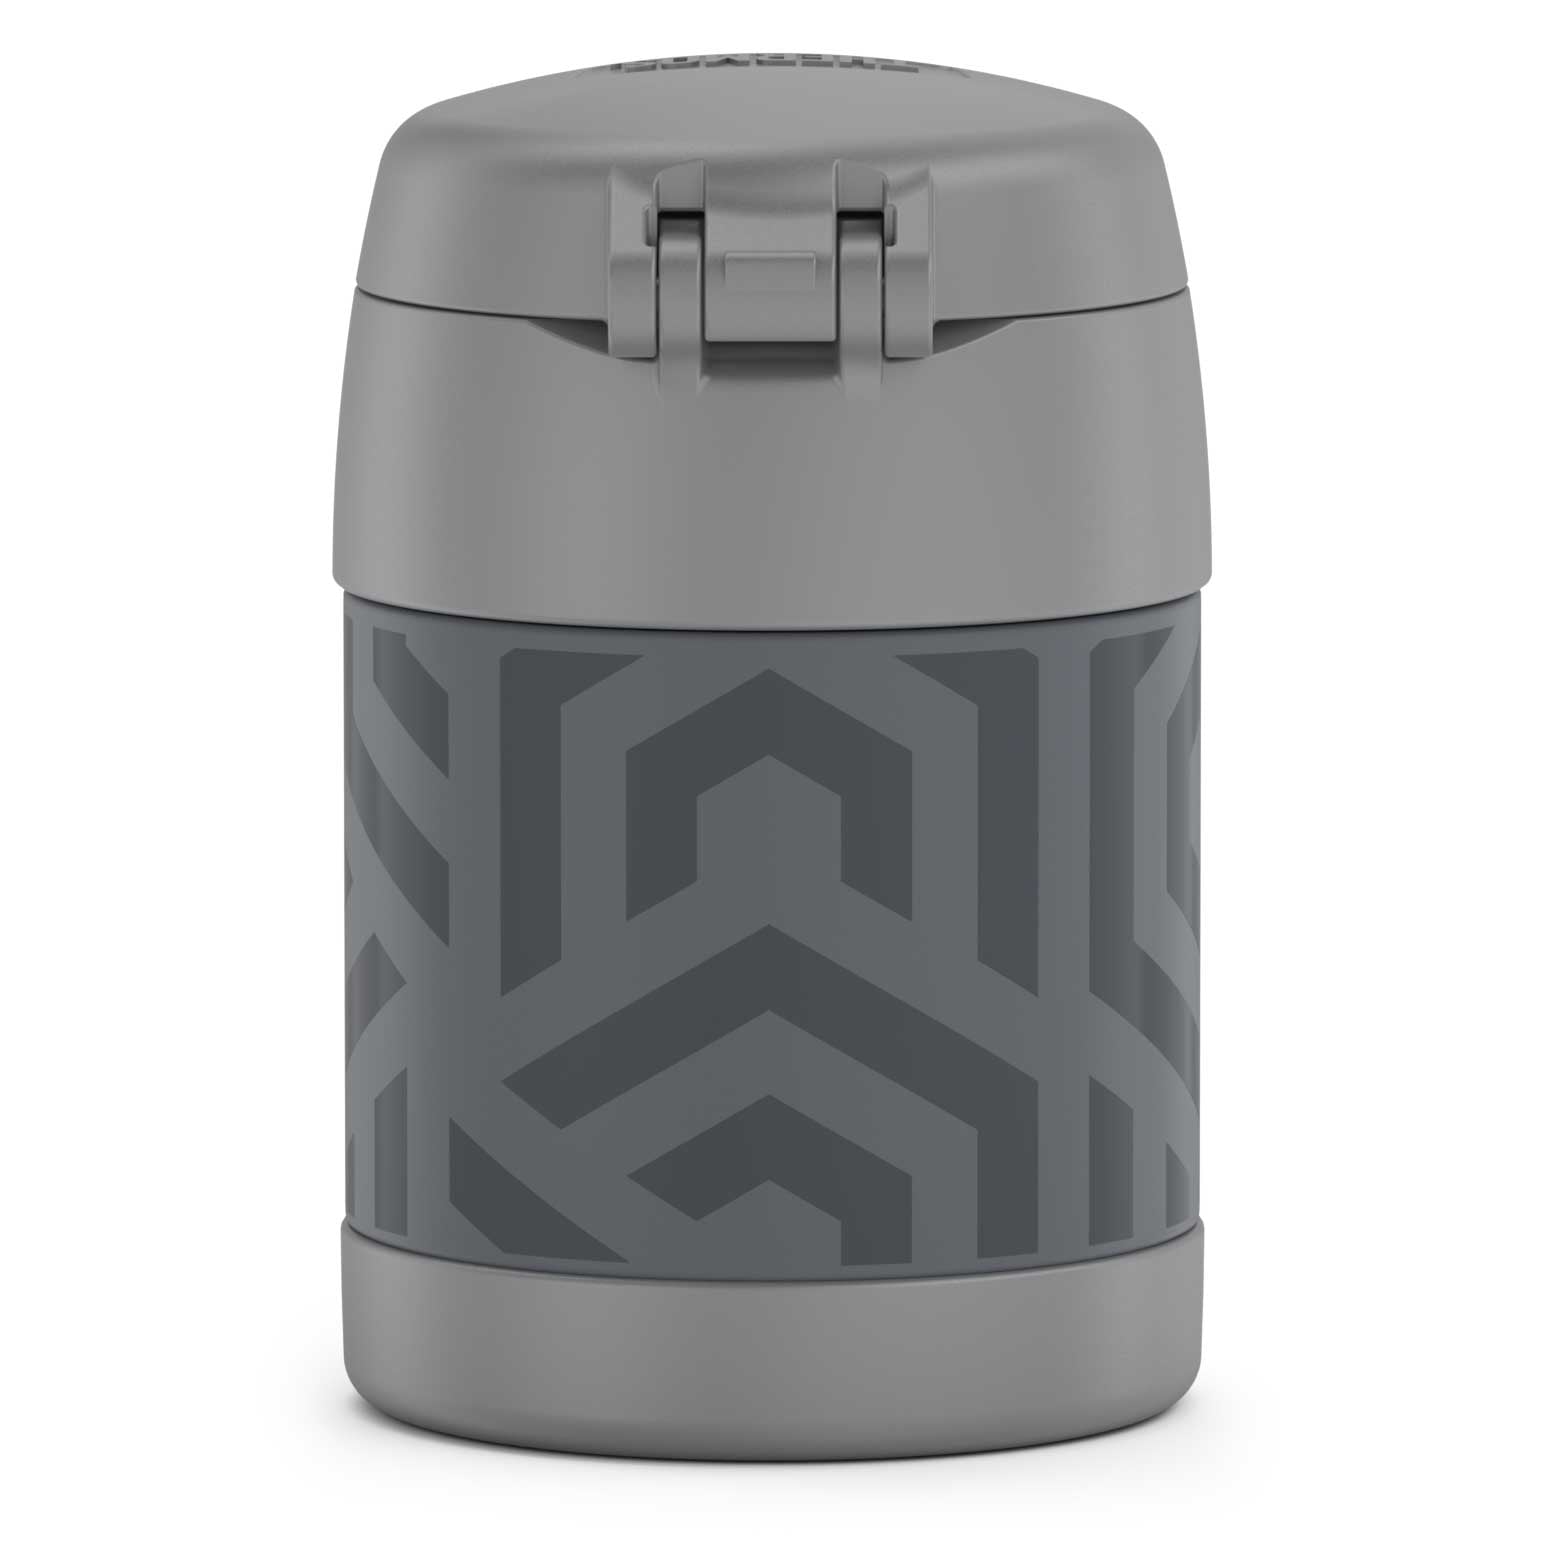 Camping Thermos - 3D Model by iQuon